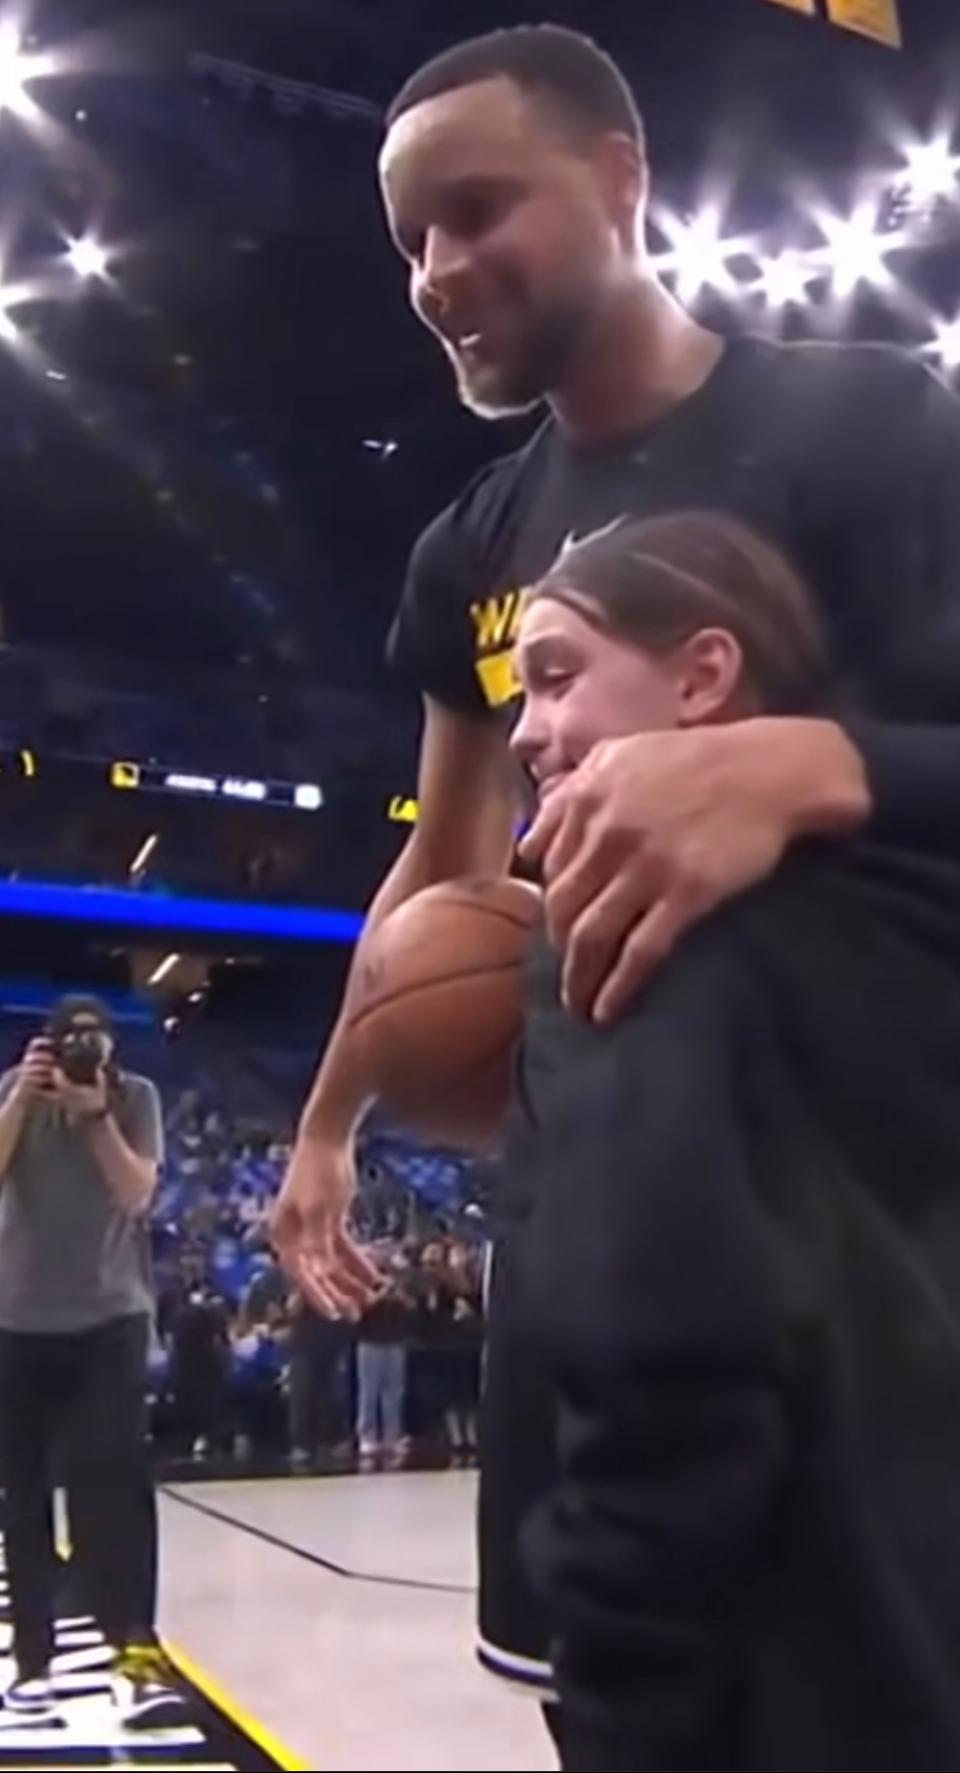 Steph Curry meets young fan